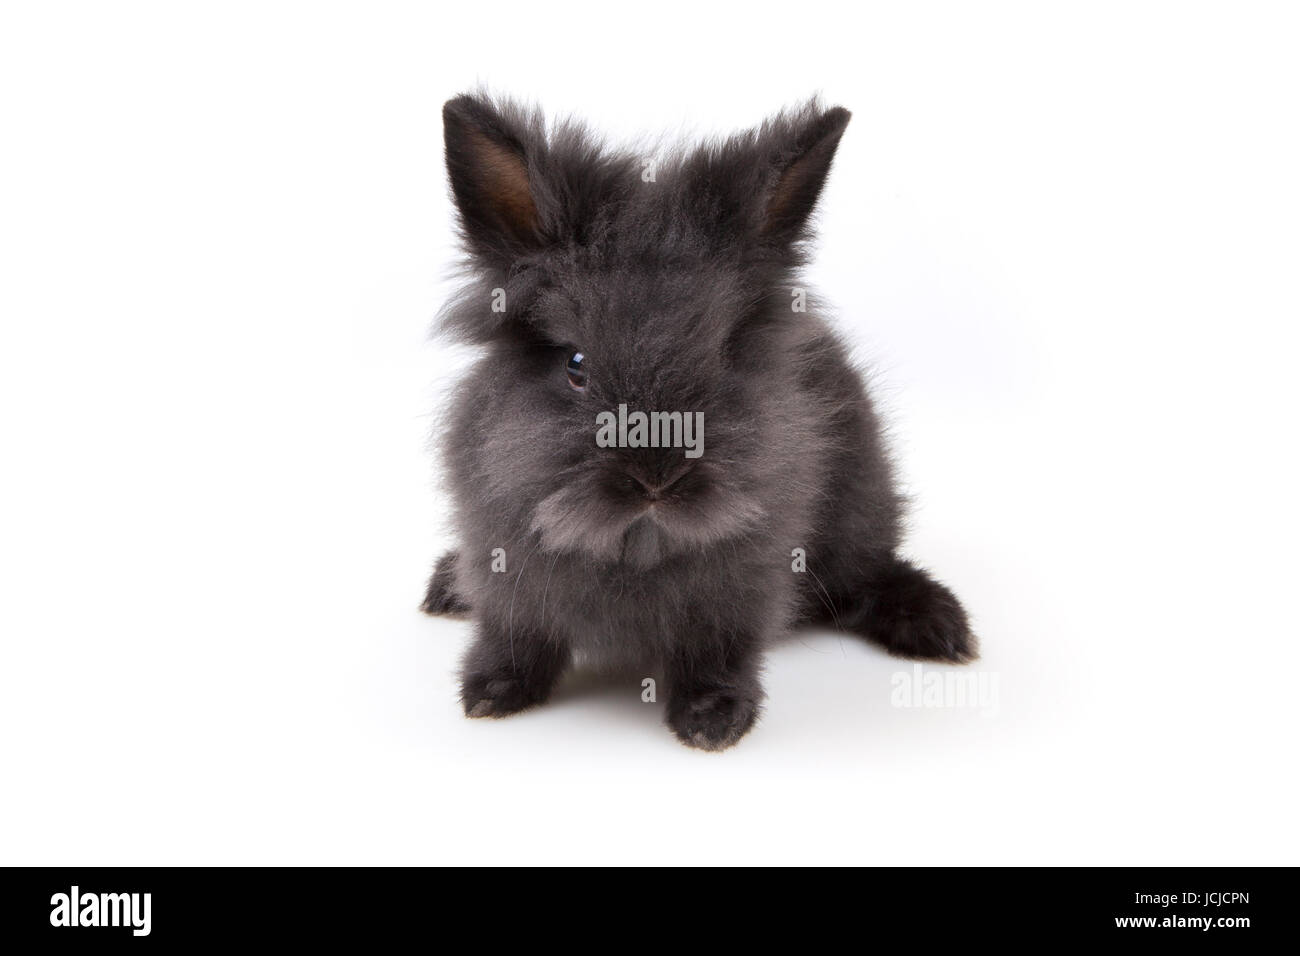 Osterhase - Easter Bunny Stock Photo